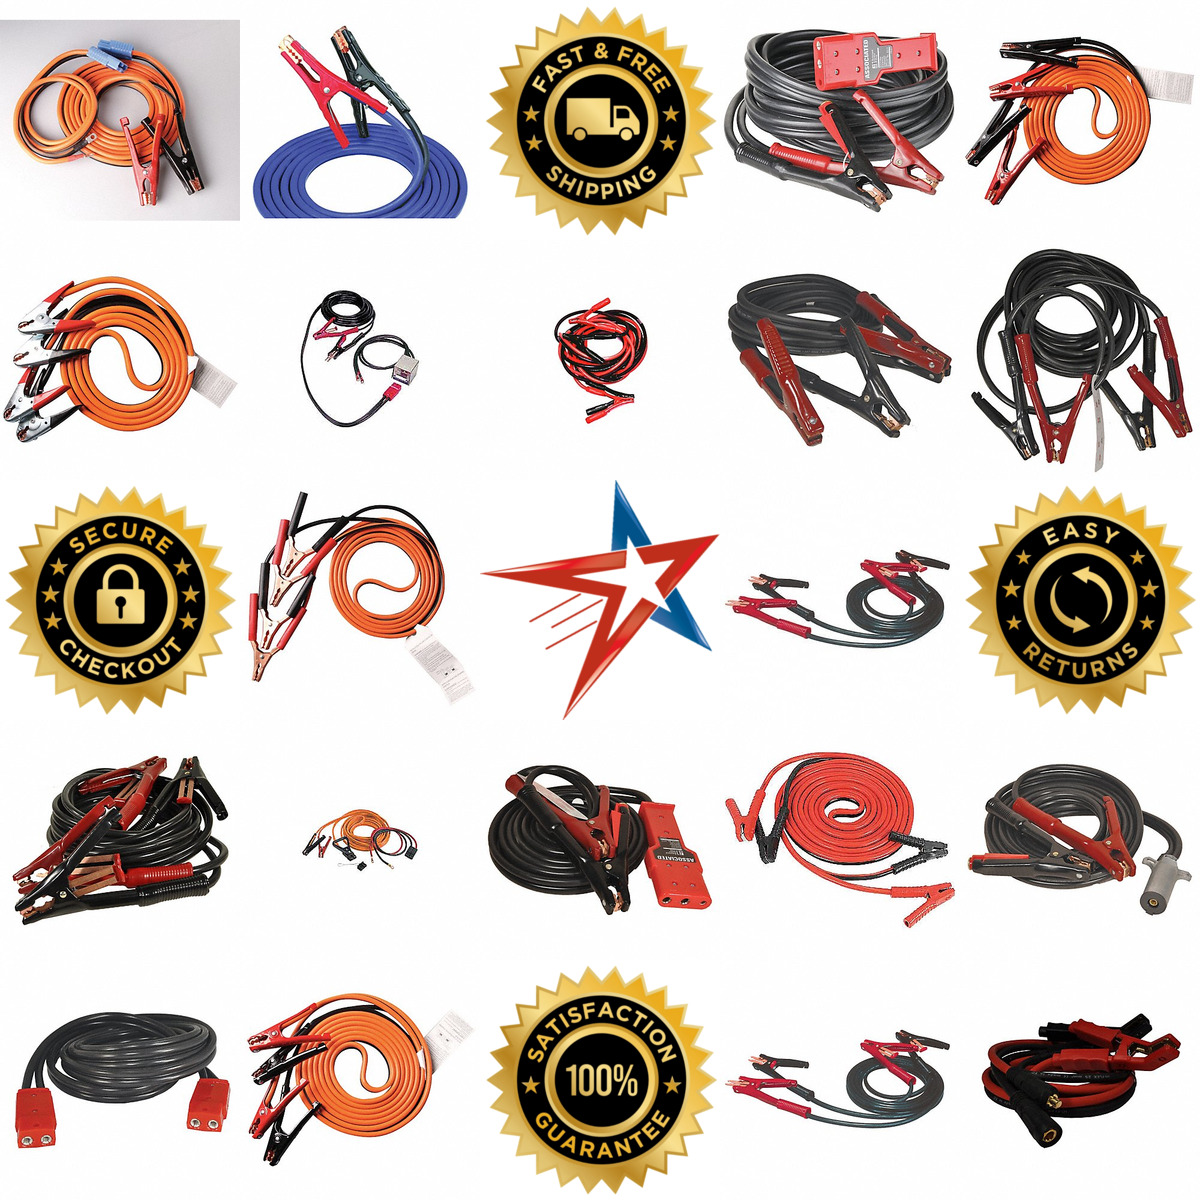 A selection of Jumper Cables products on GoVets